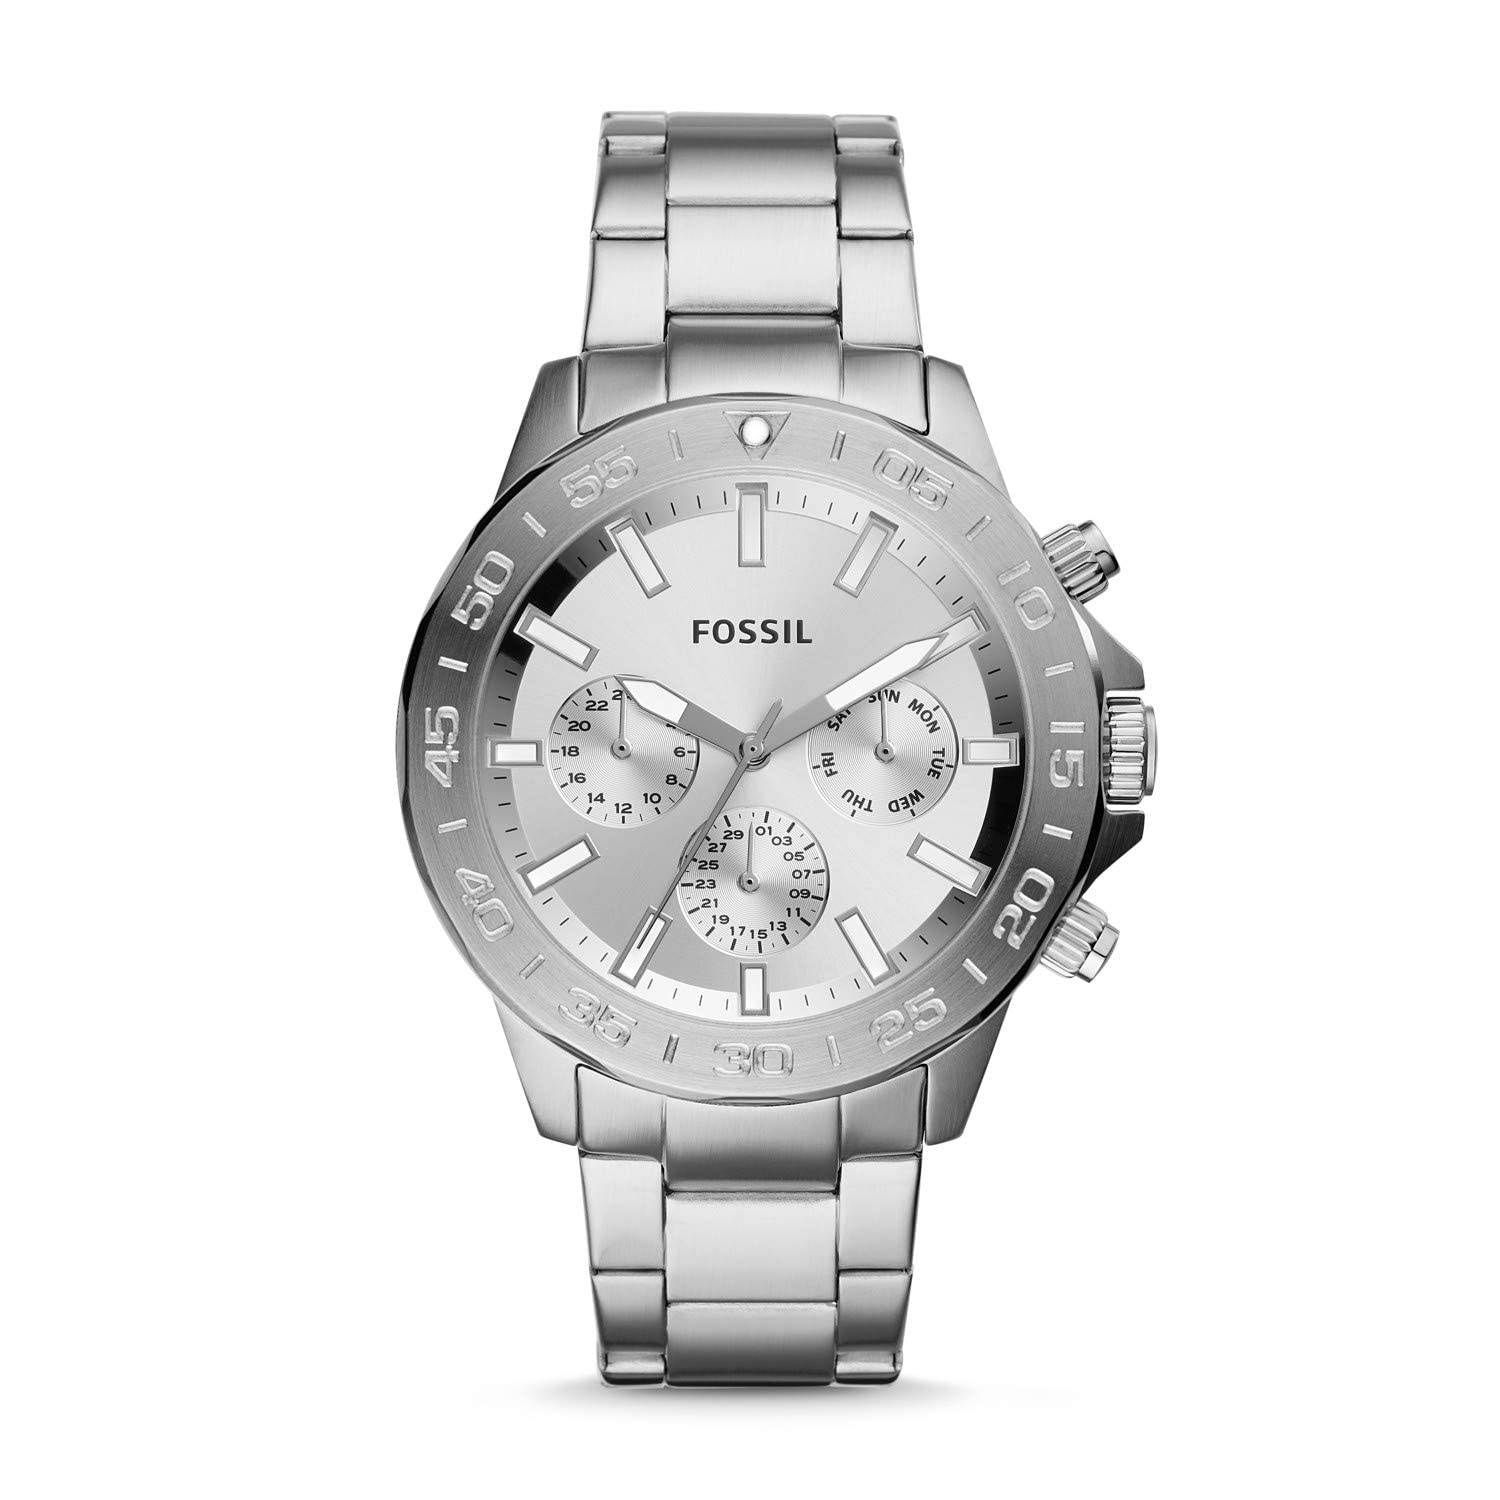 Bannon Multifunction Stainless Steel Watch